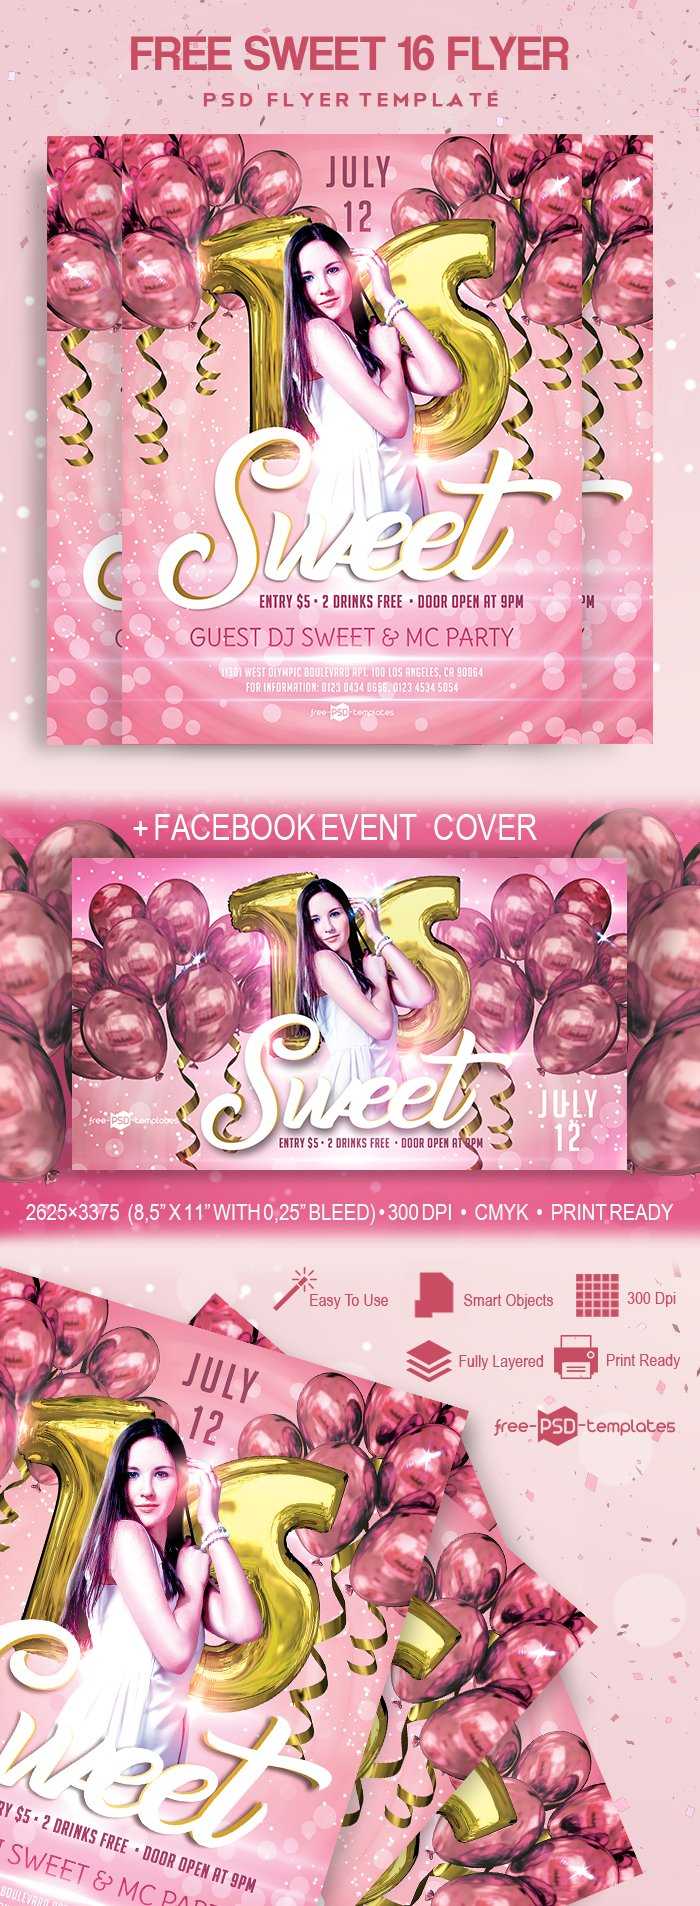 Free Sweet 16 Flyer In Psd | Free Psd Templates For Sweet 16 Banner Template